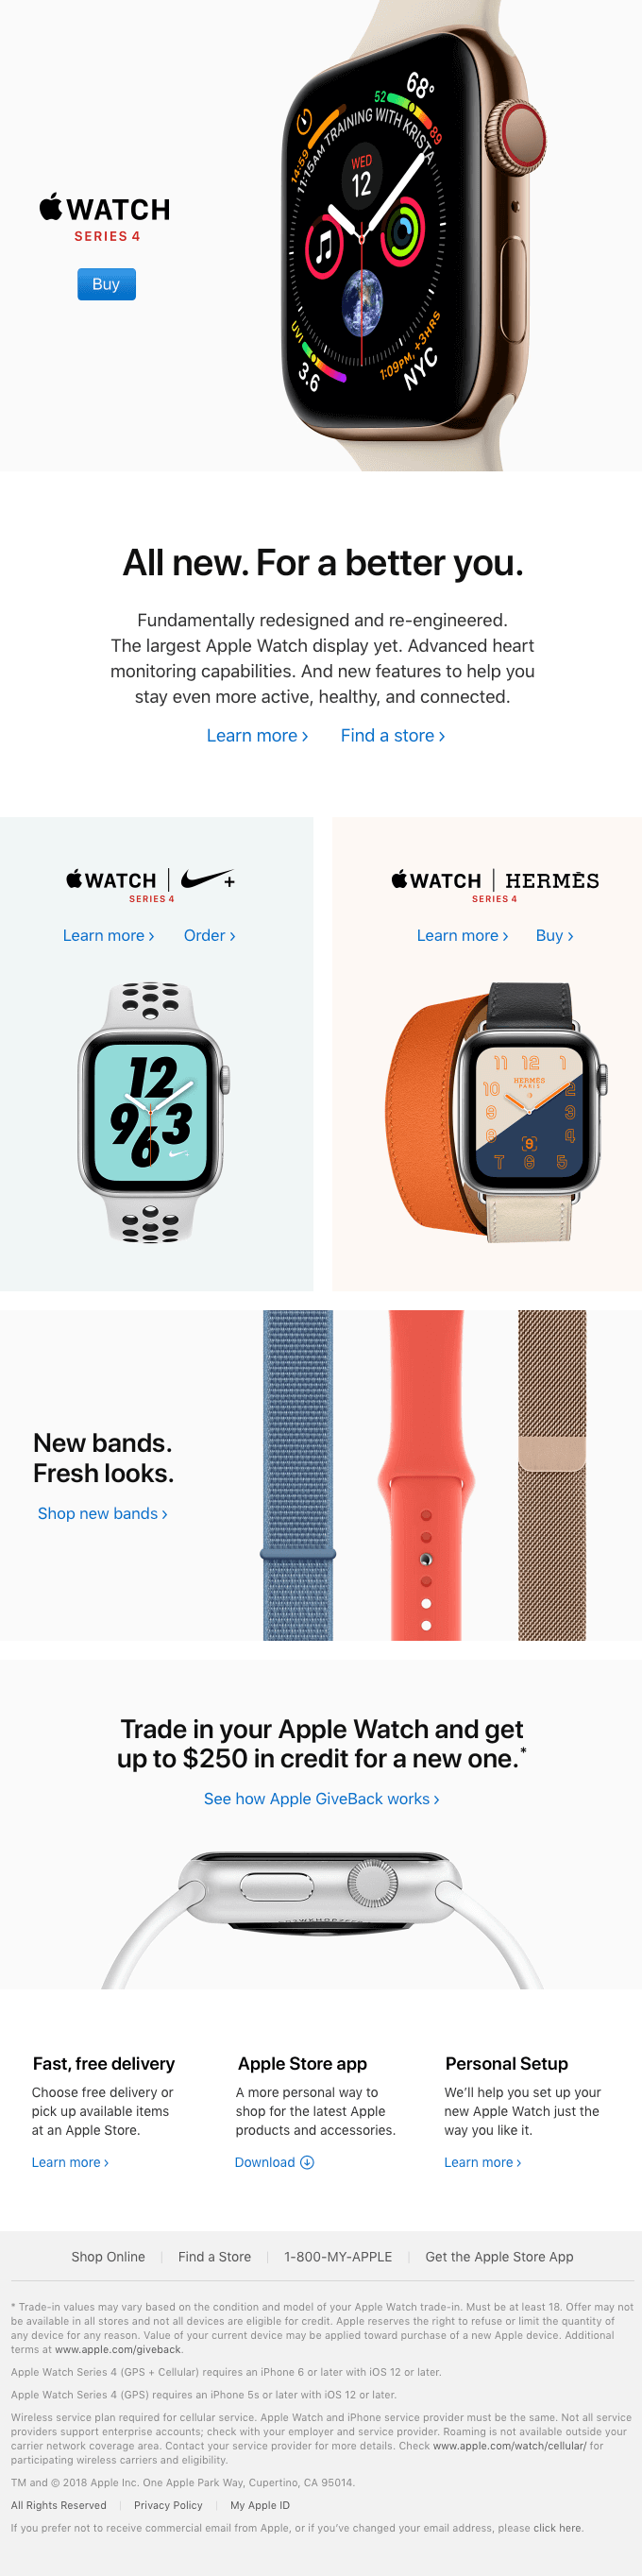 All new. For a better you. Apple launch email sample